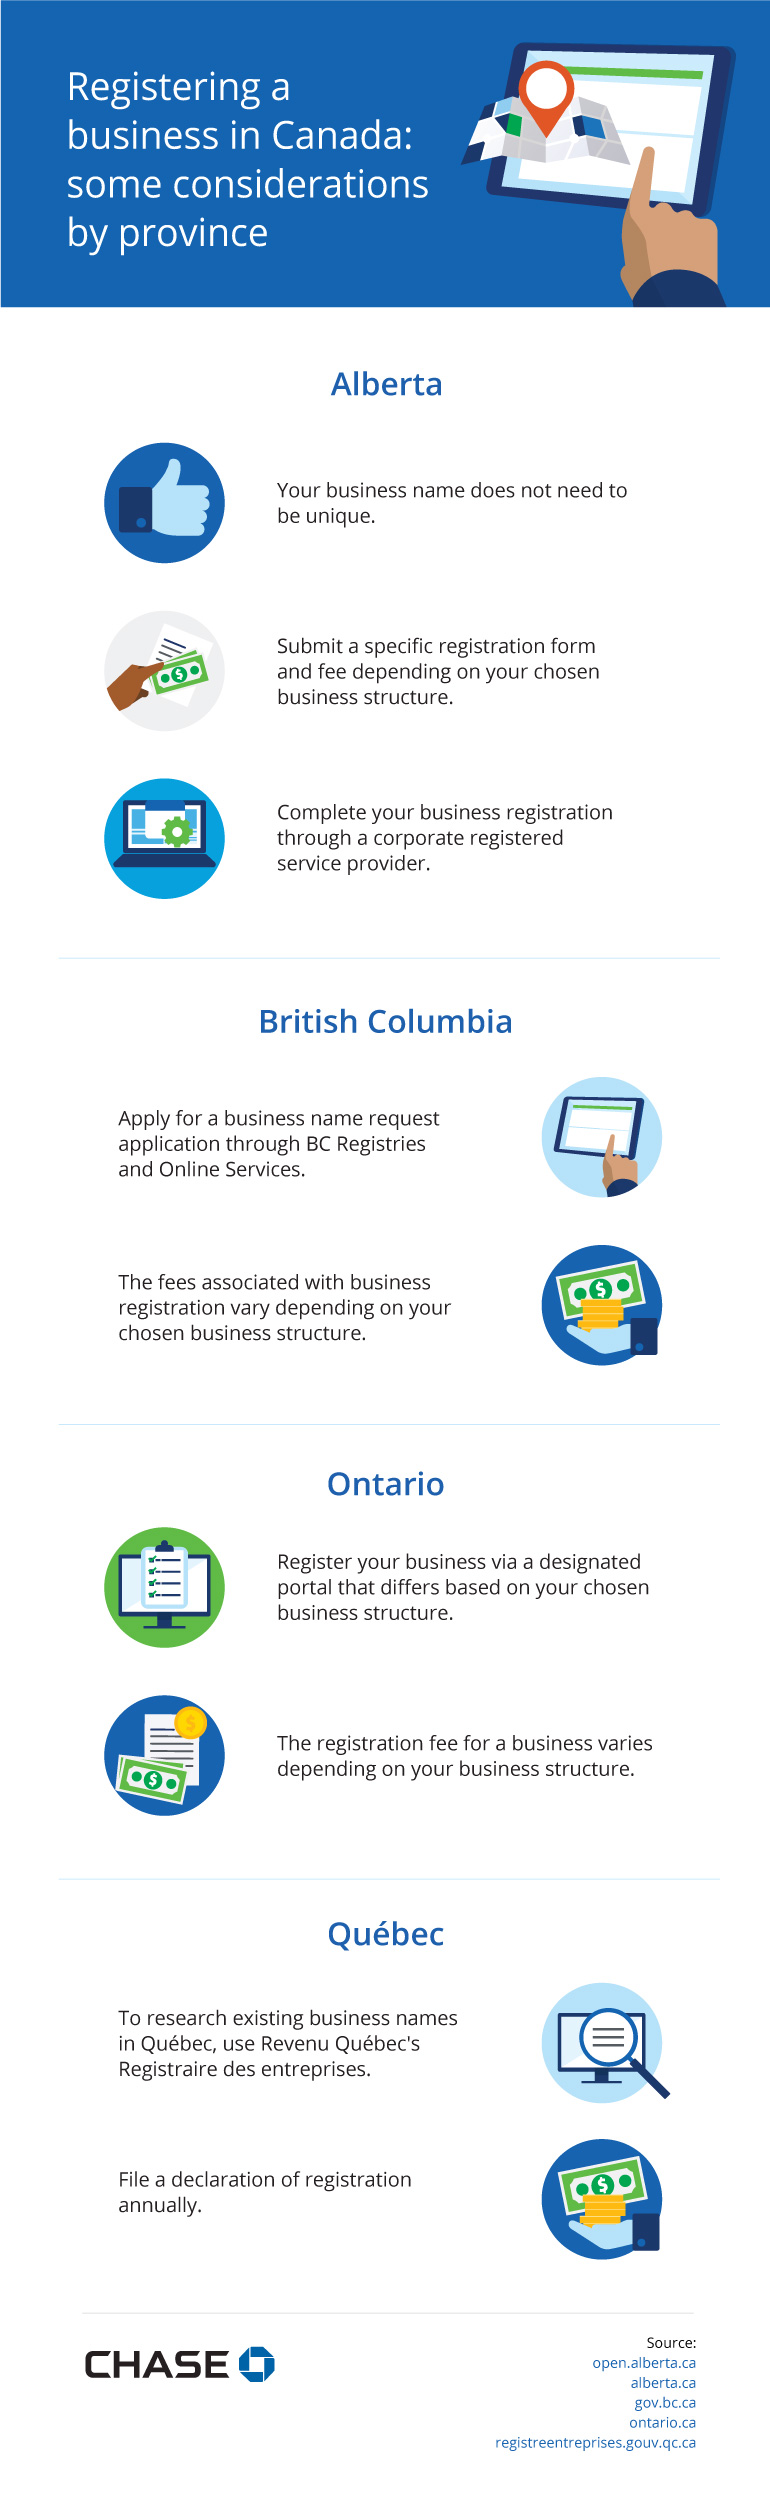 Infographic illustrating the provincial considerations when registering a business in Canada.